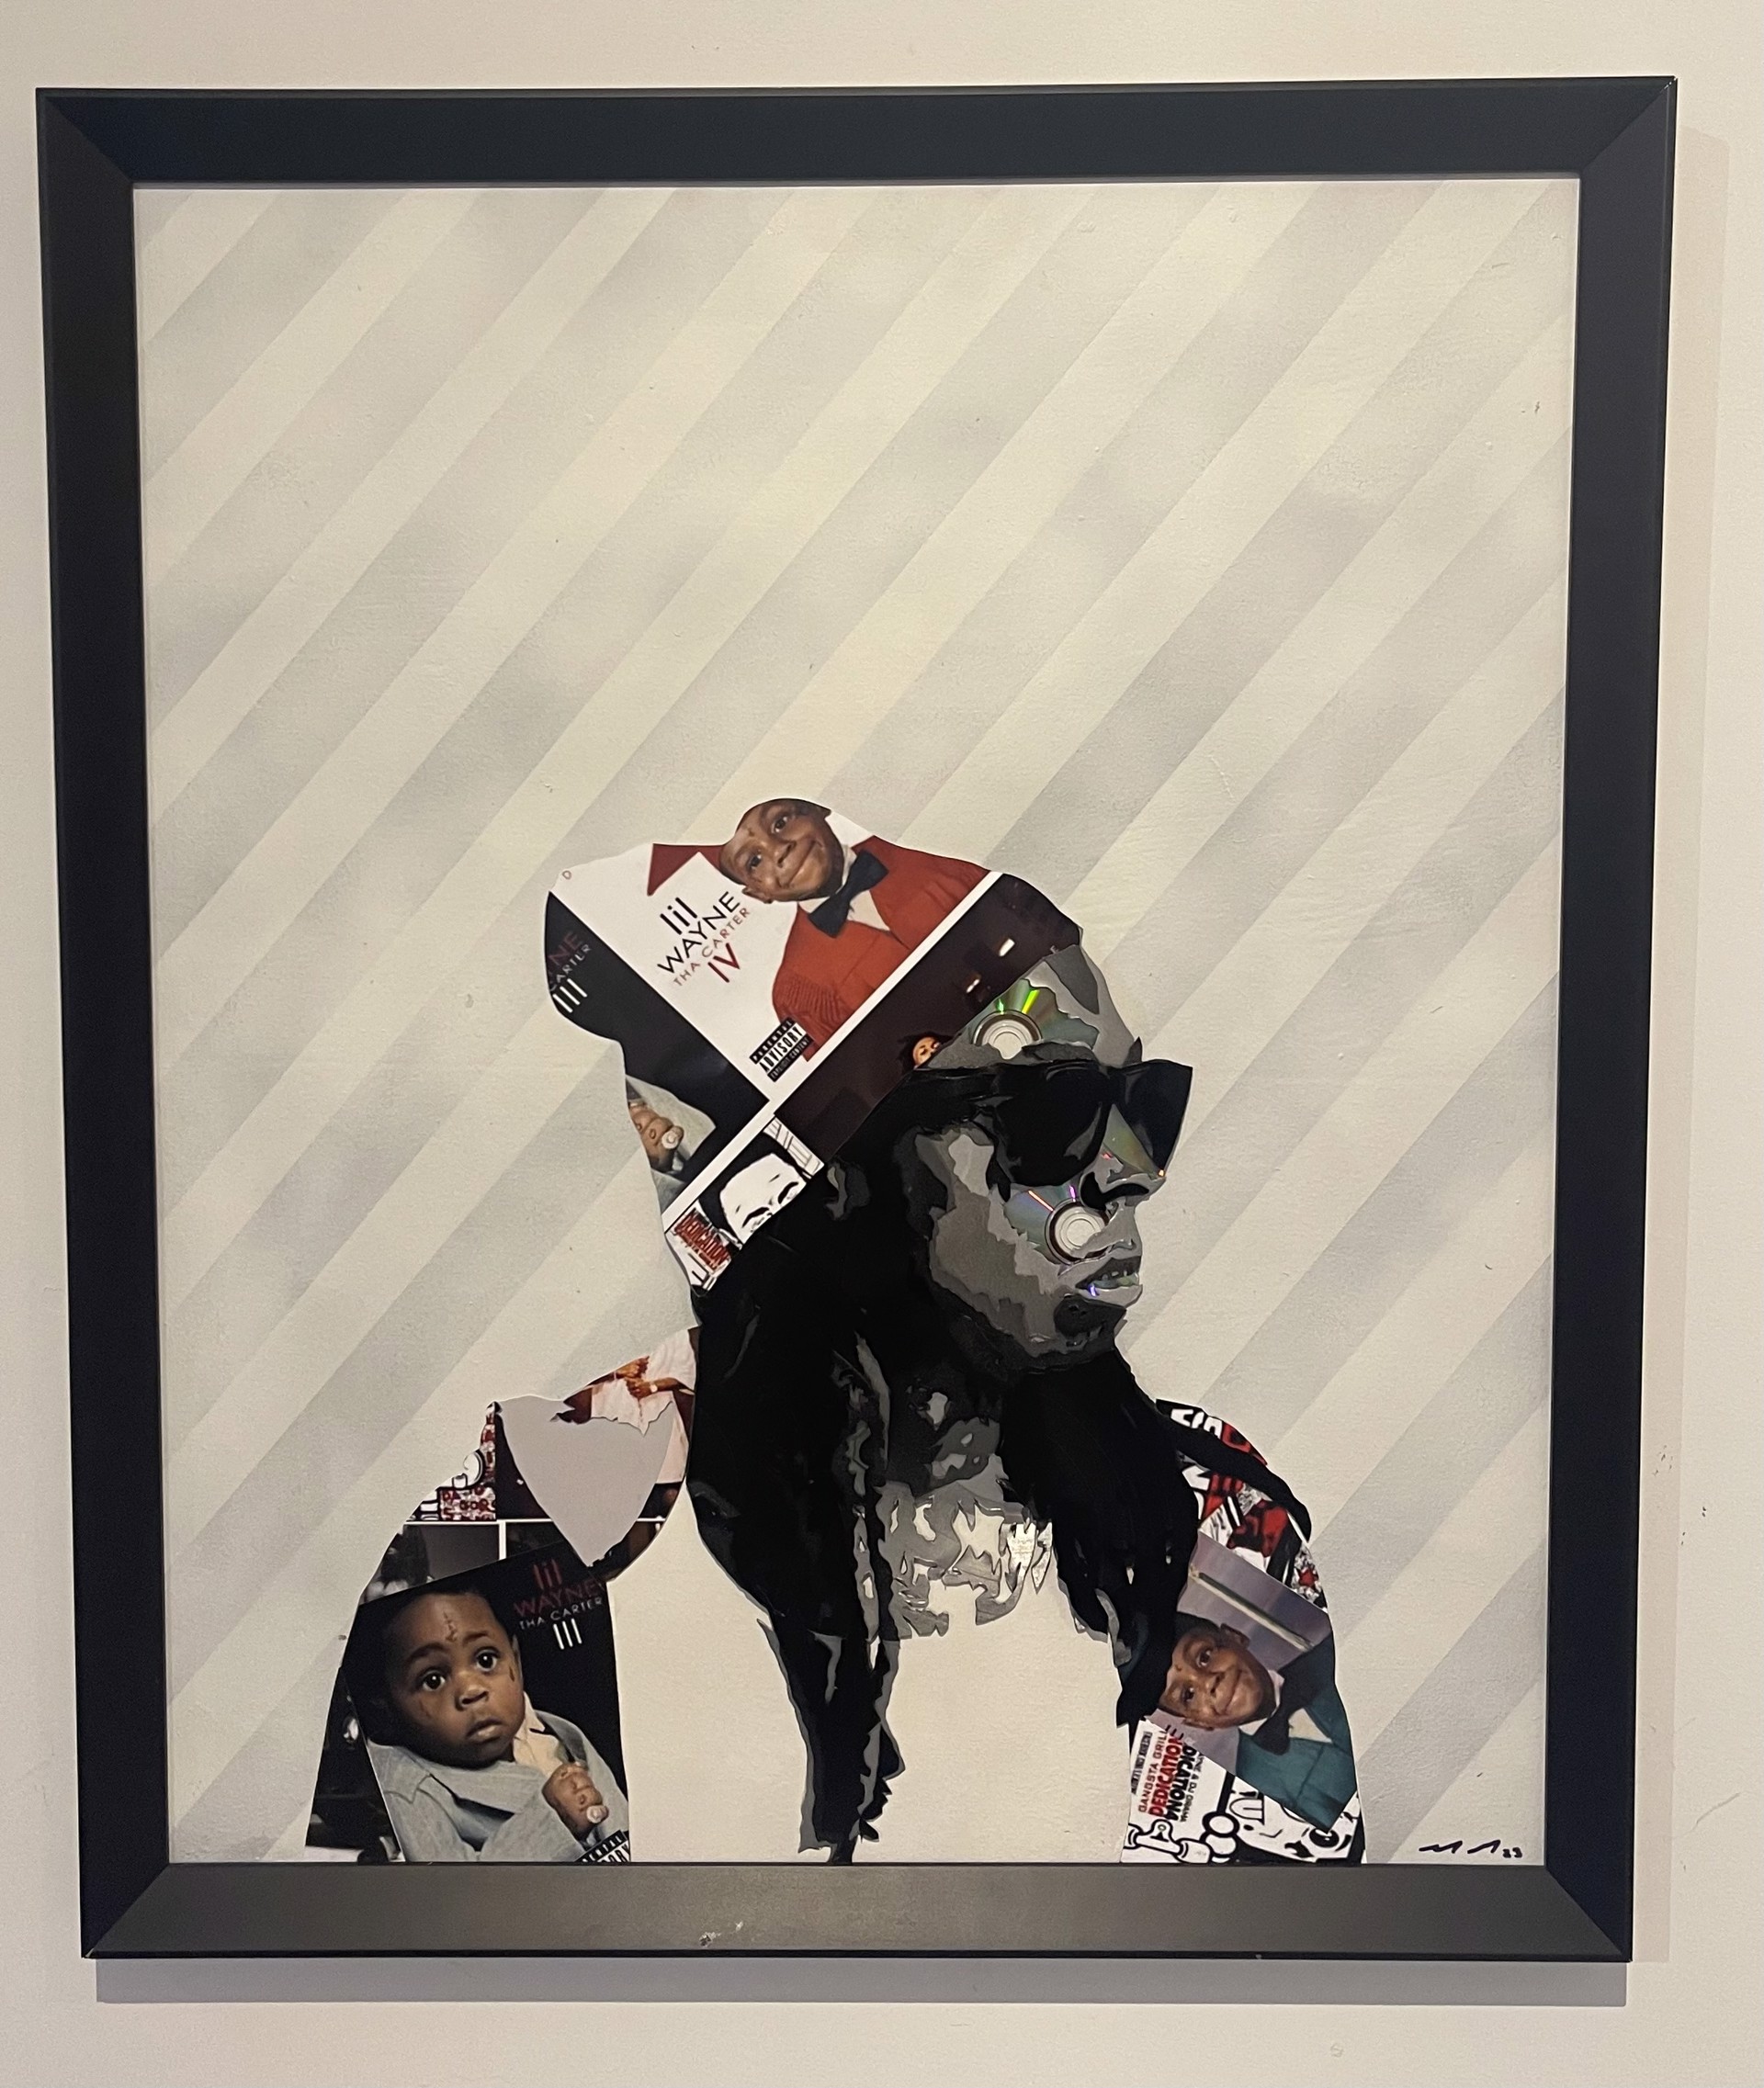 Weezy by Michael Johnson